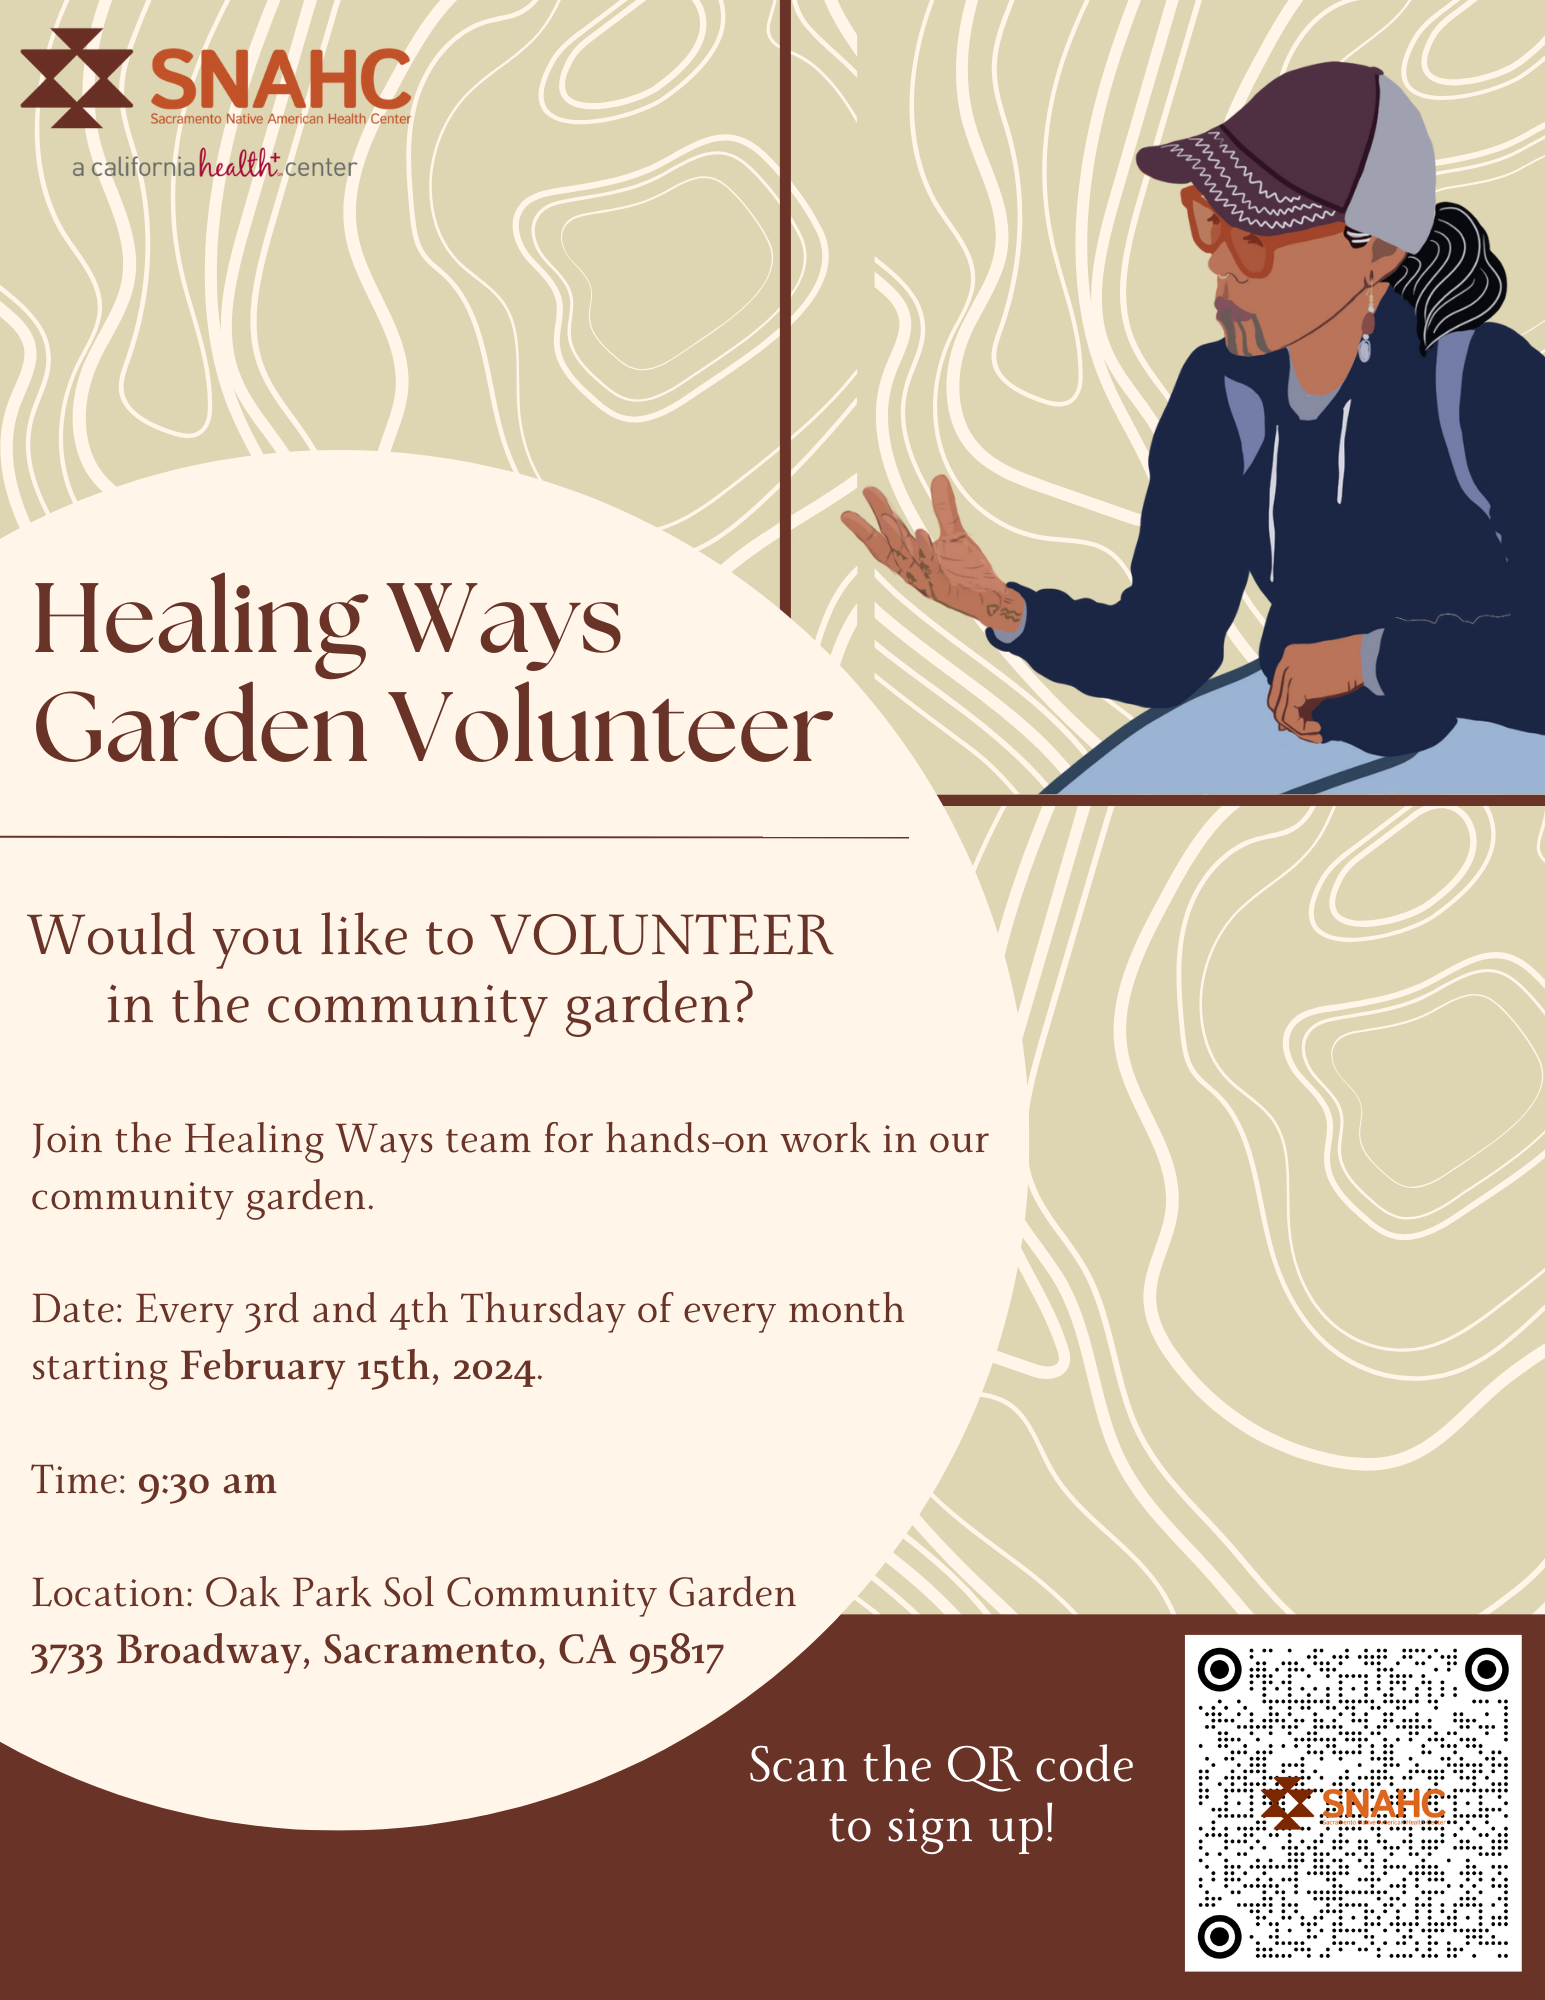 Garden Volunteer flyer taking place on February 15th and February 22nd at 9:30 am at Oak Park Sol Community Garden.